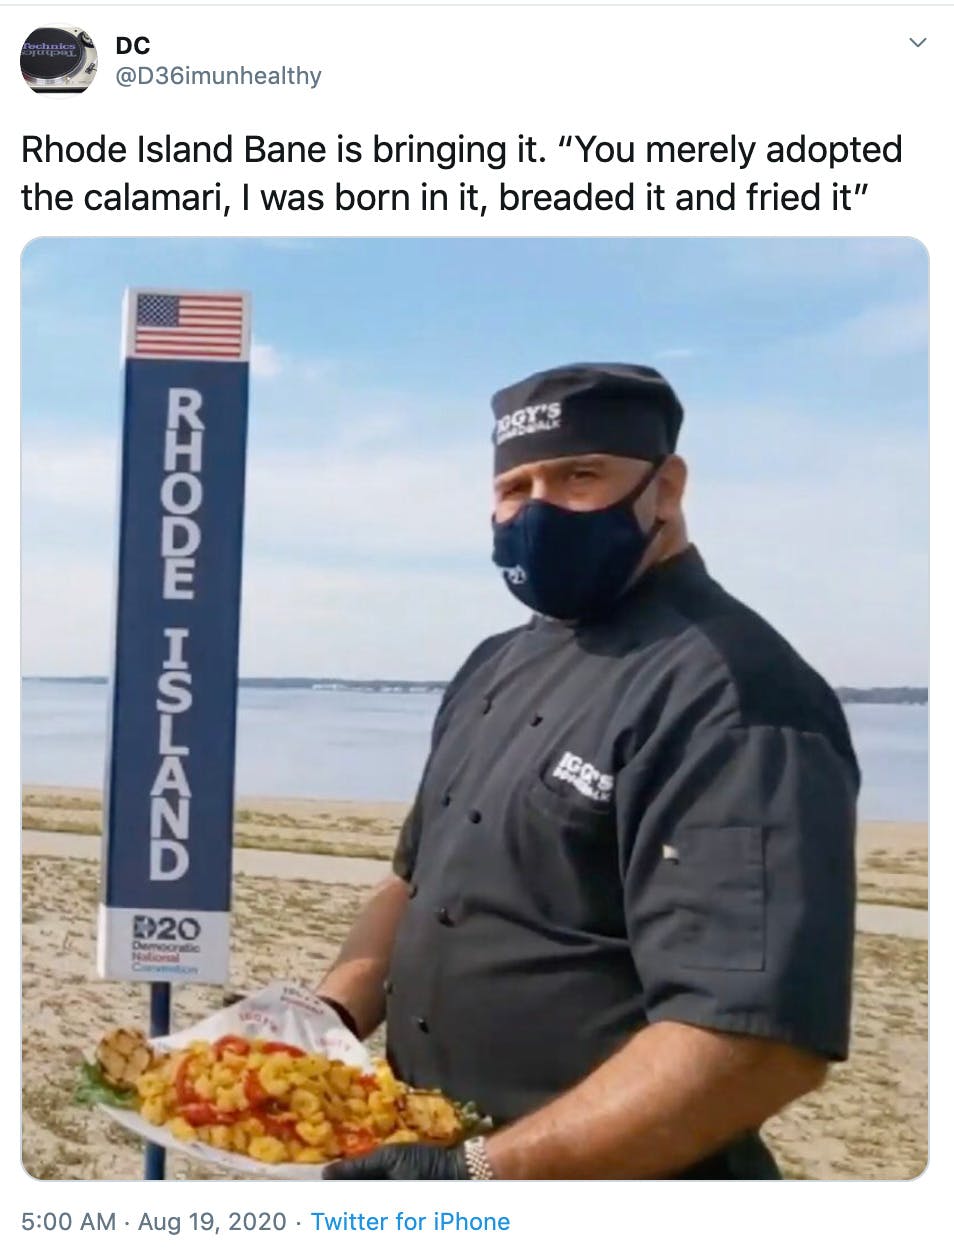 "Rhode Island Bane is bringing it. “You merely adopted the calamari, I was born in it, breaded it and fried it”" close up of the masked chef